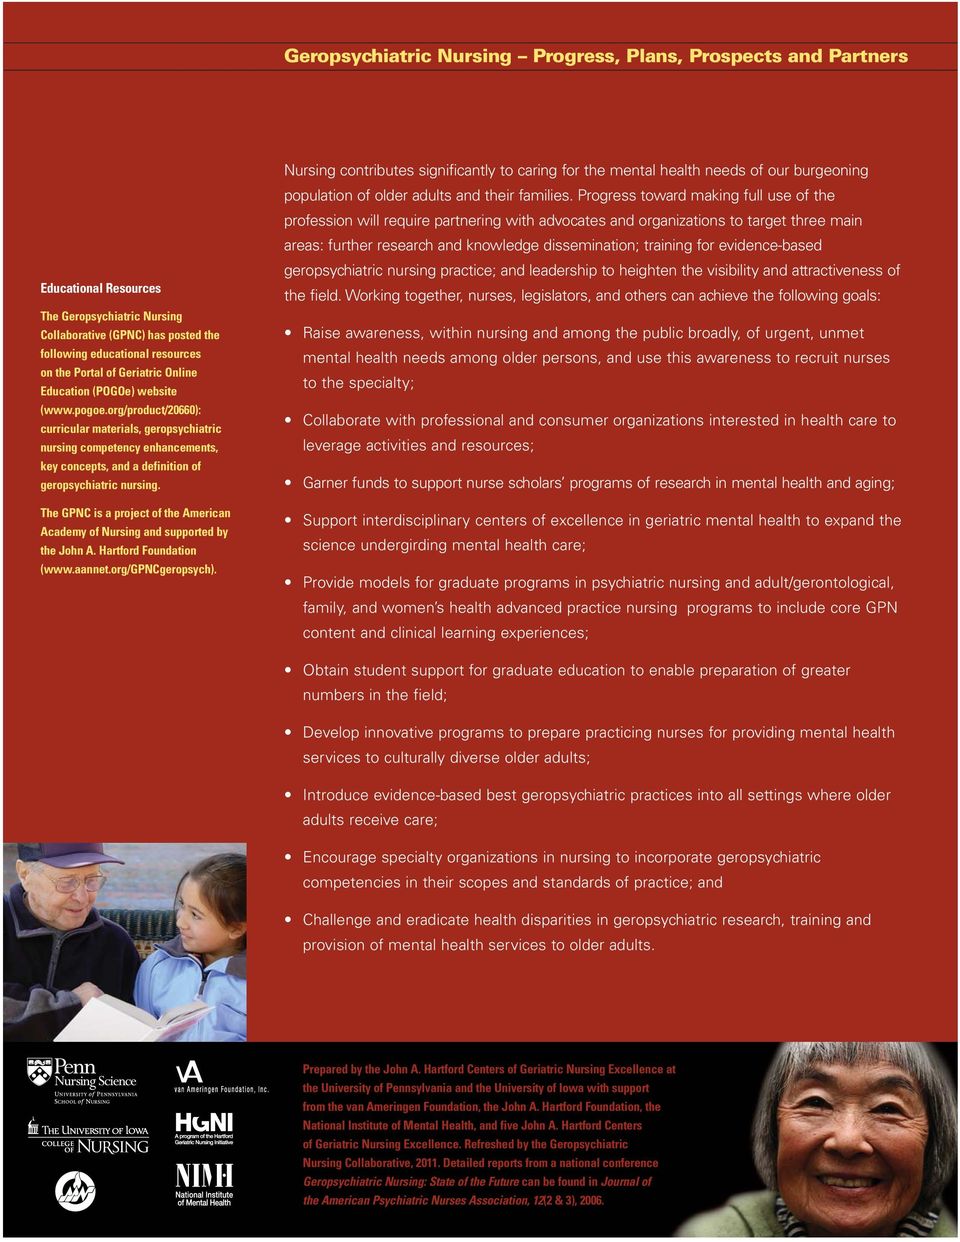 org/product/20660): curricular materials, geropsychiatric nursing competency enhancements, key concepts, and a definition of geropsychiatric nursing.